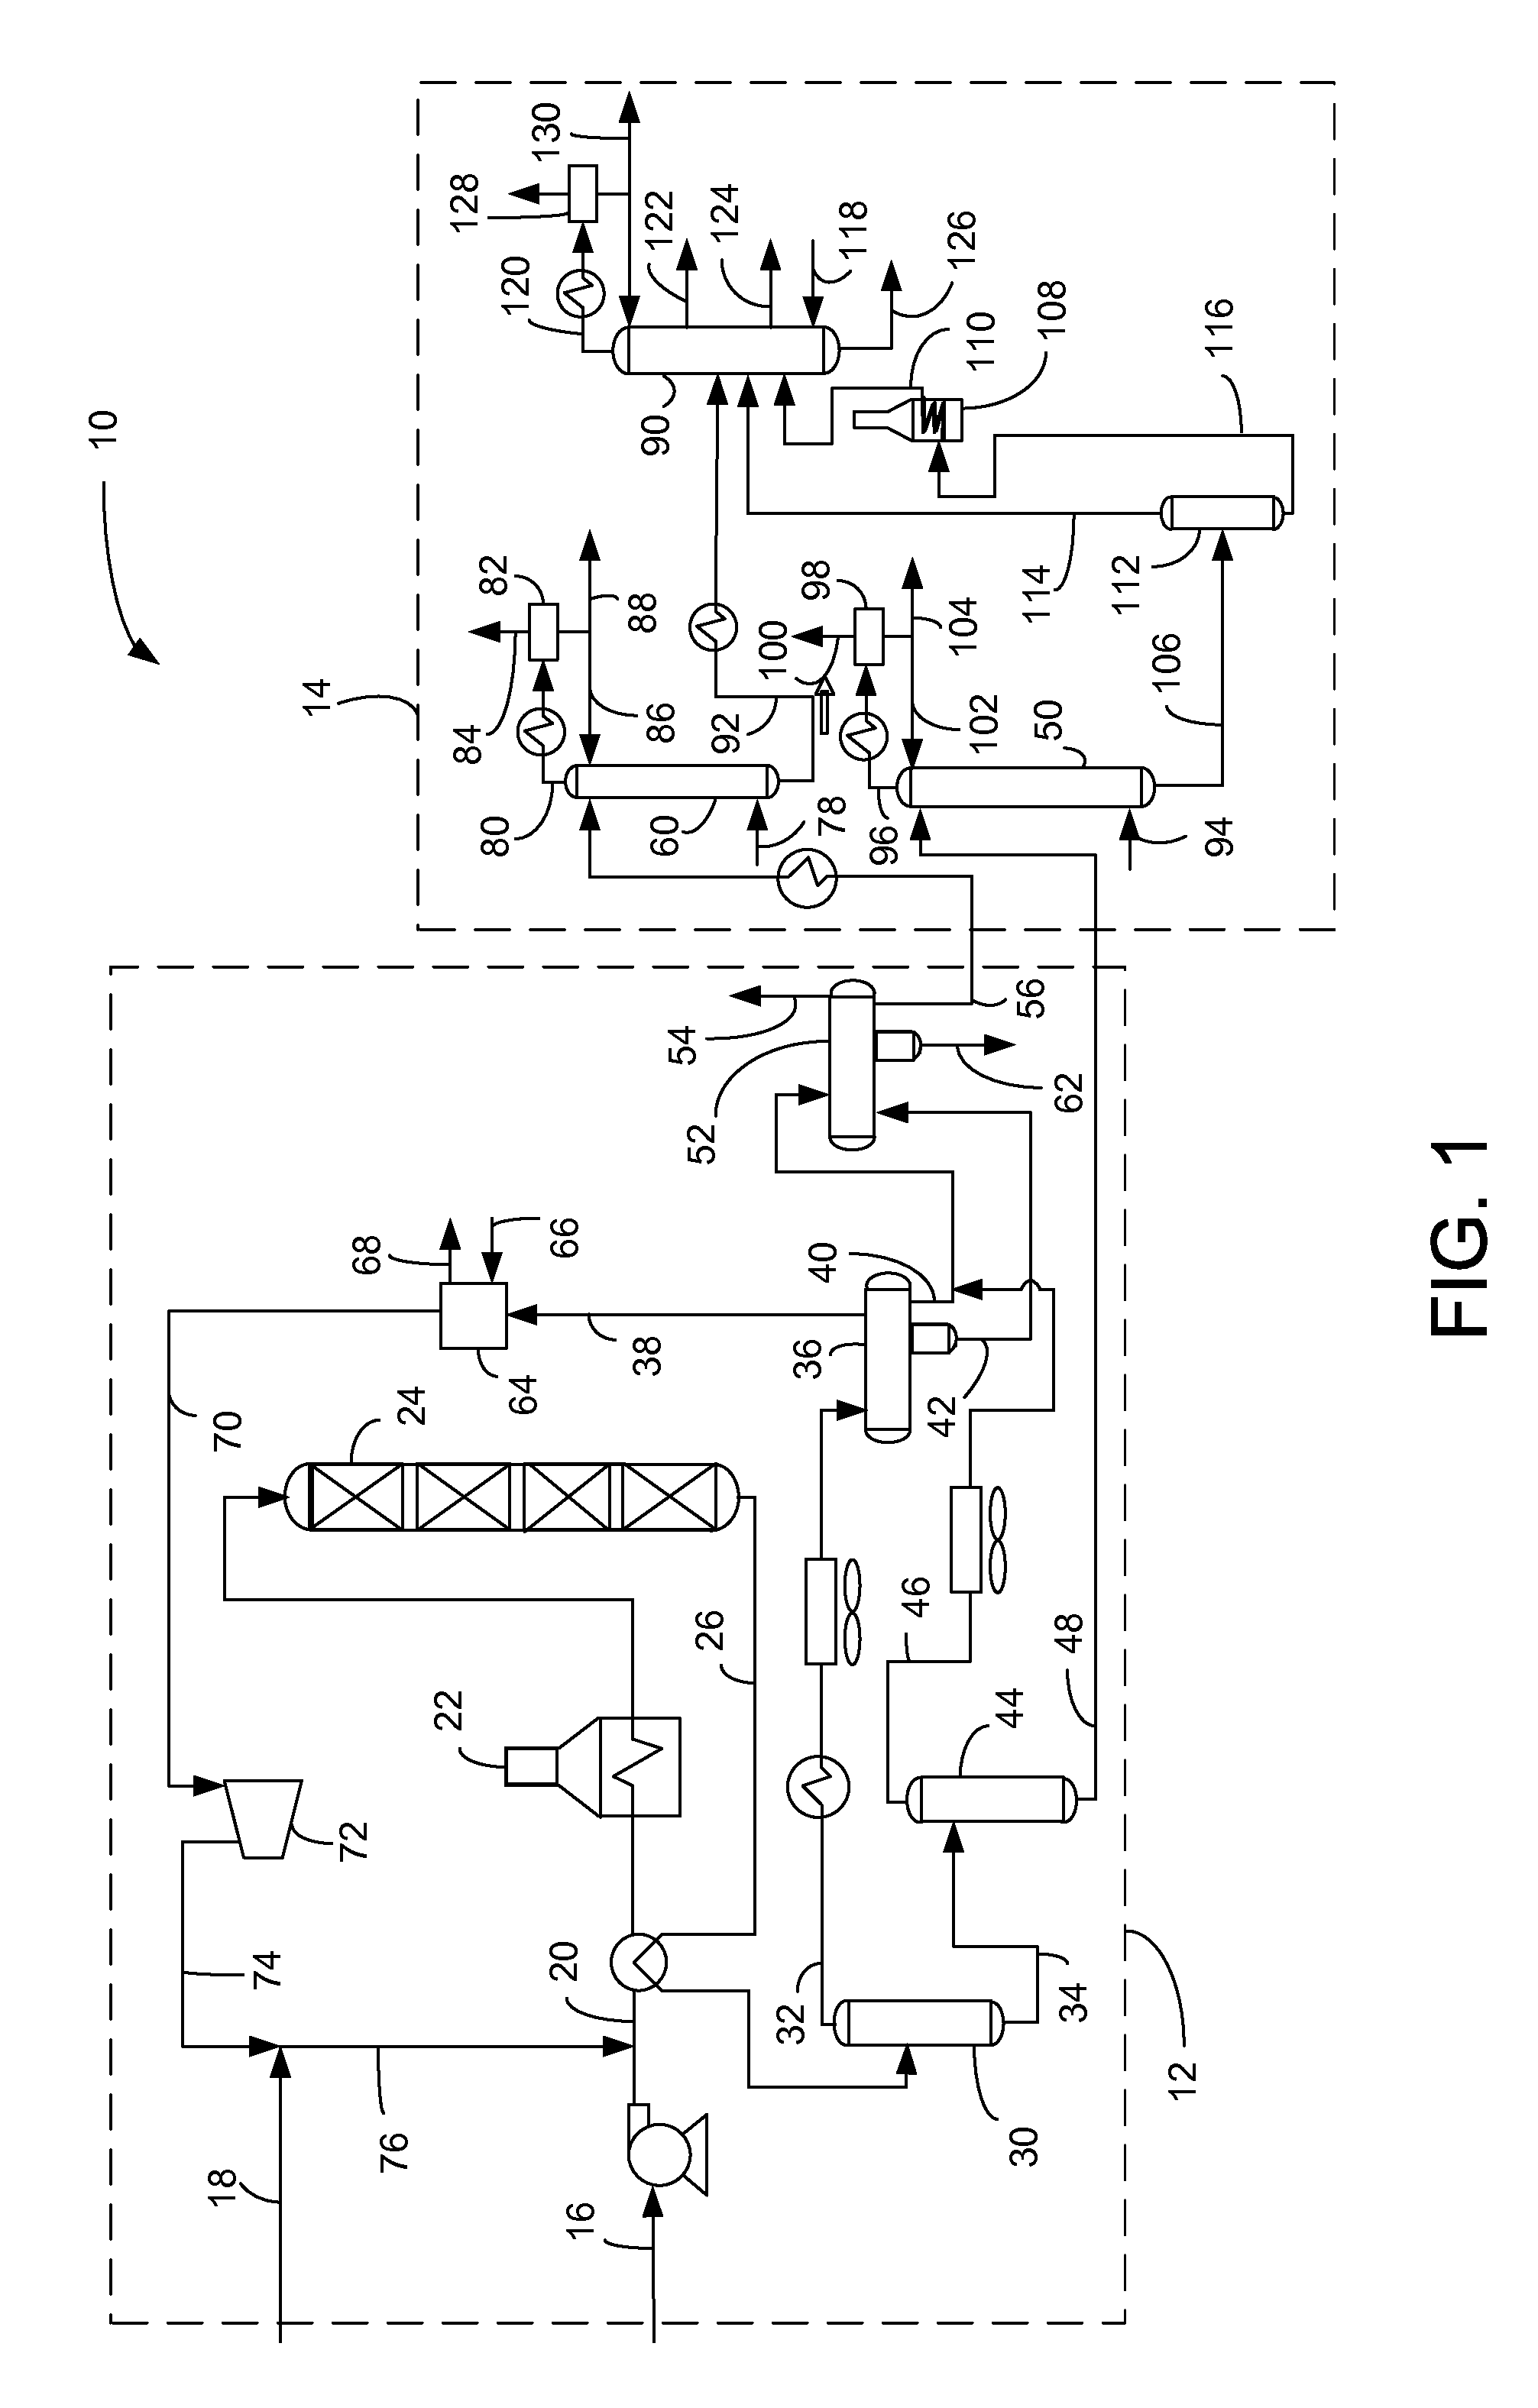 Apparatus for recovering hydroprocessed hydrocarbons with two strippers and common overhead recovery